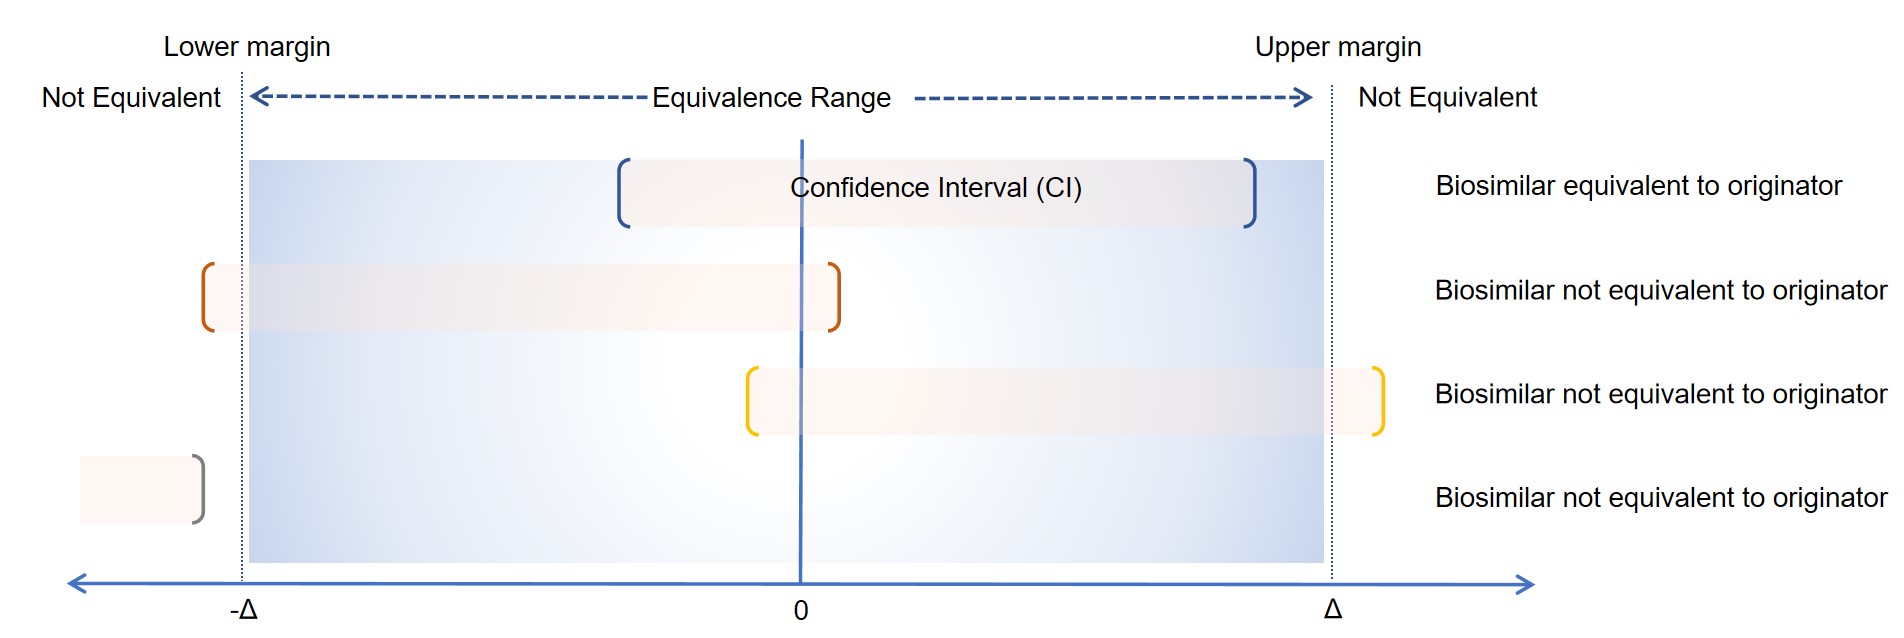 Examples of statistical equivalence testing outcomes.